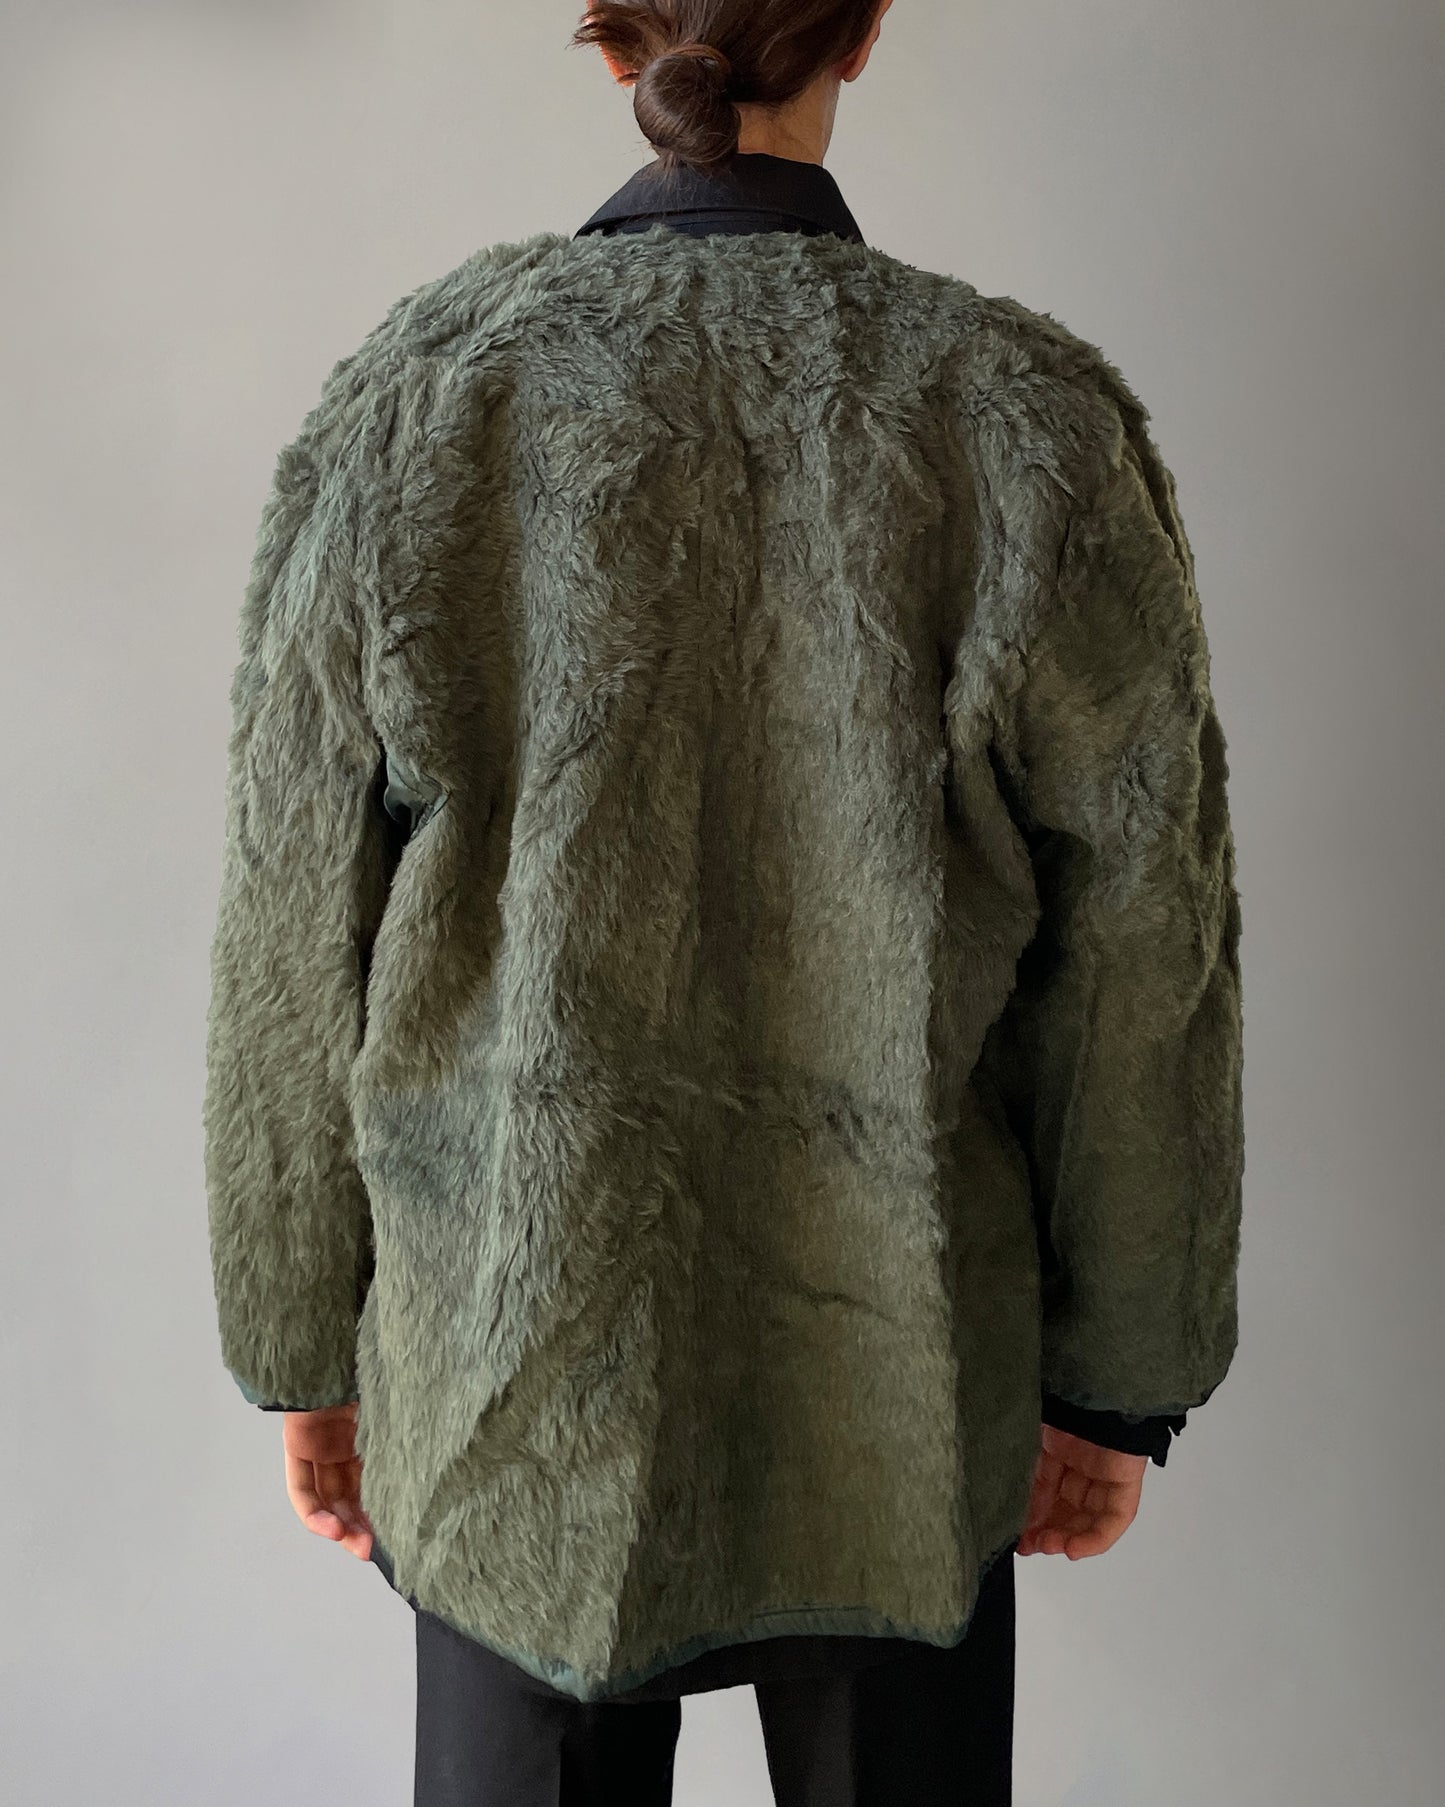 80's Lining w/Fur Made in Greece